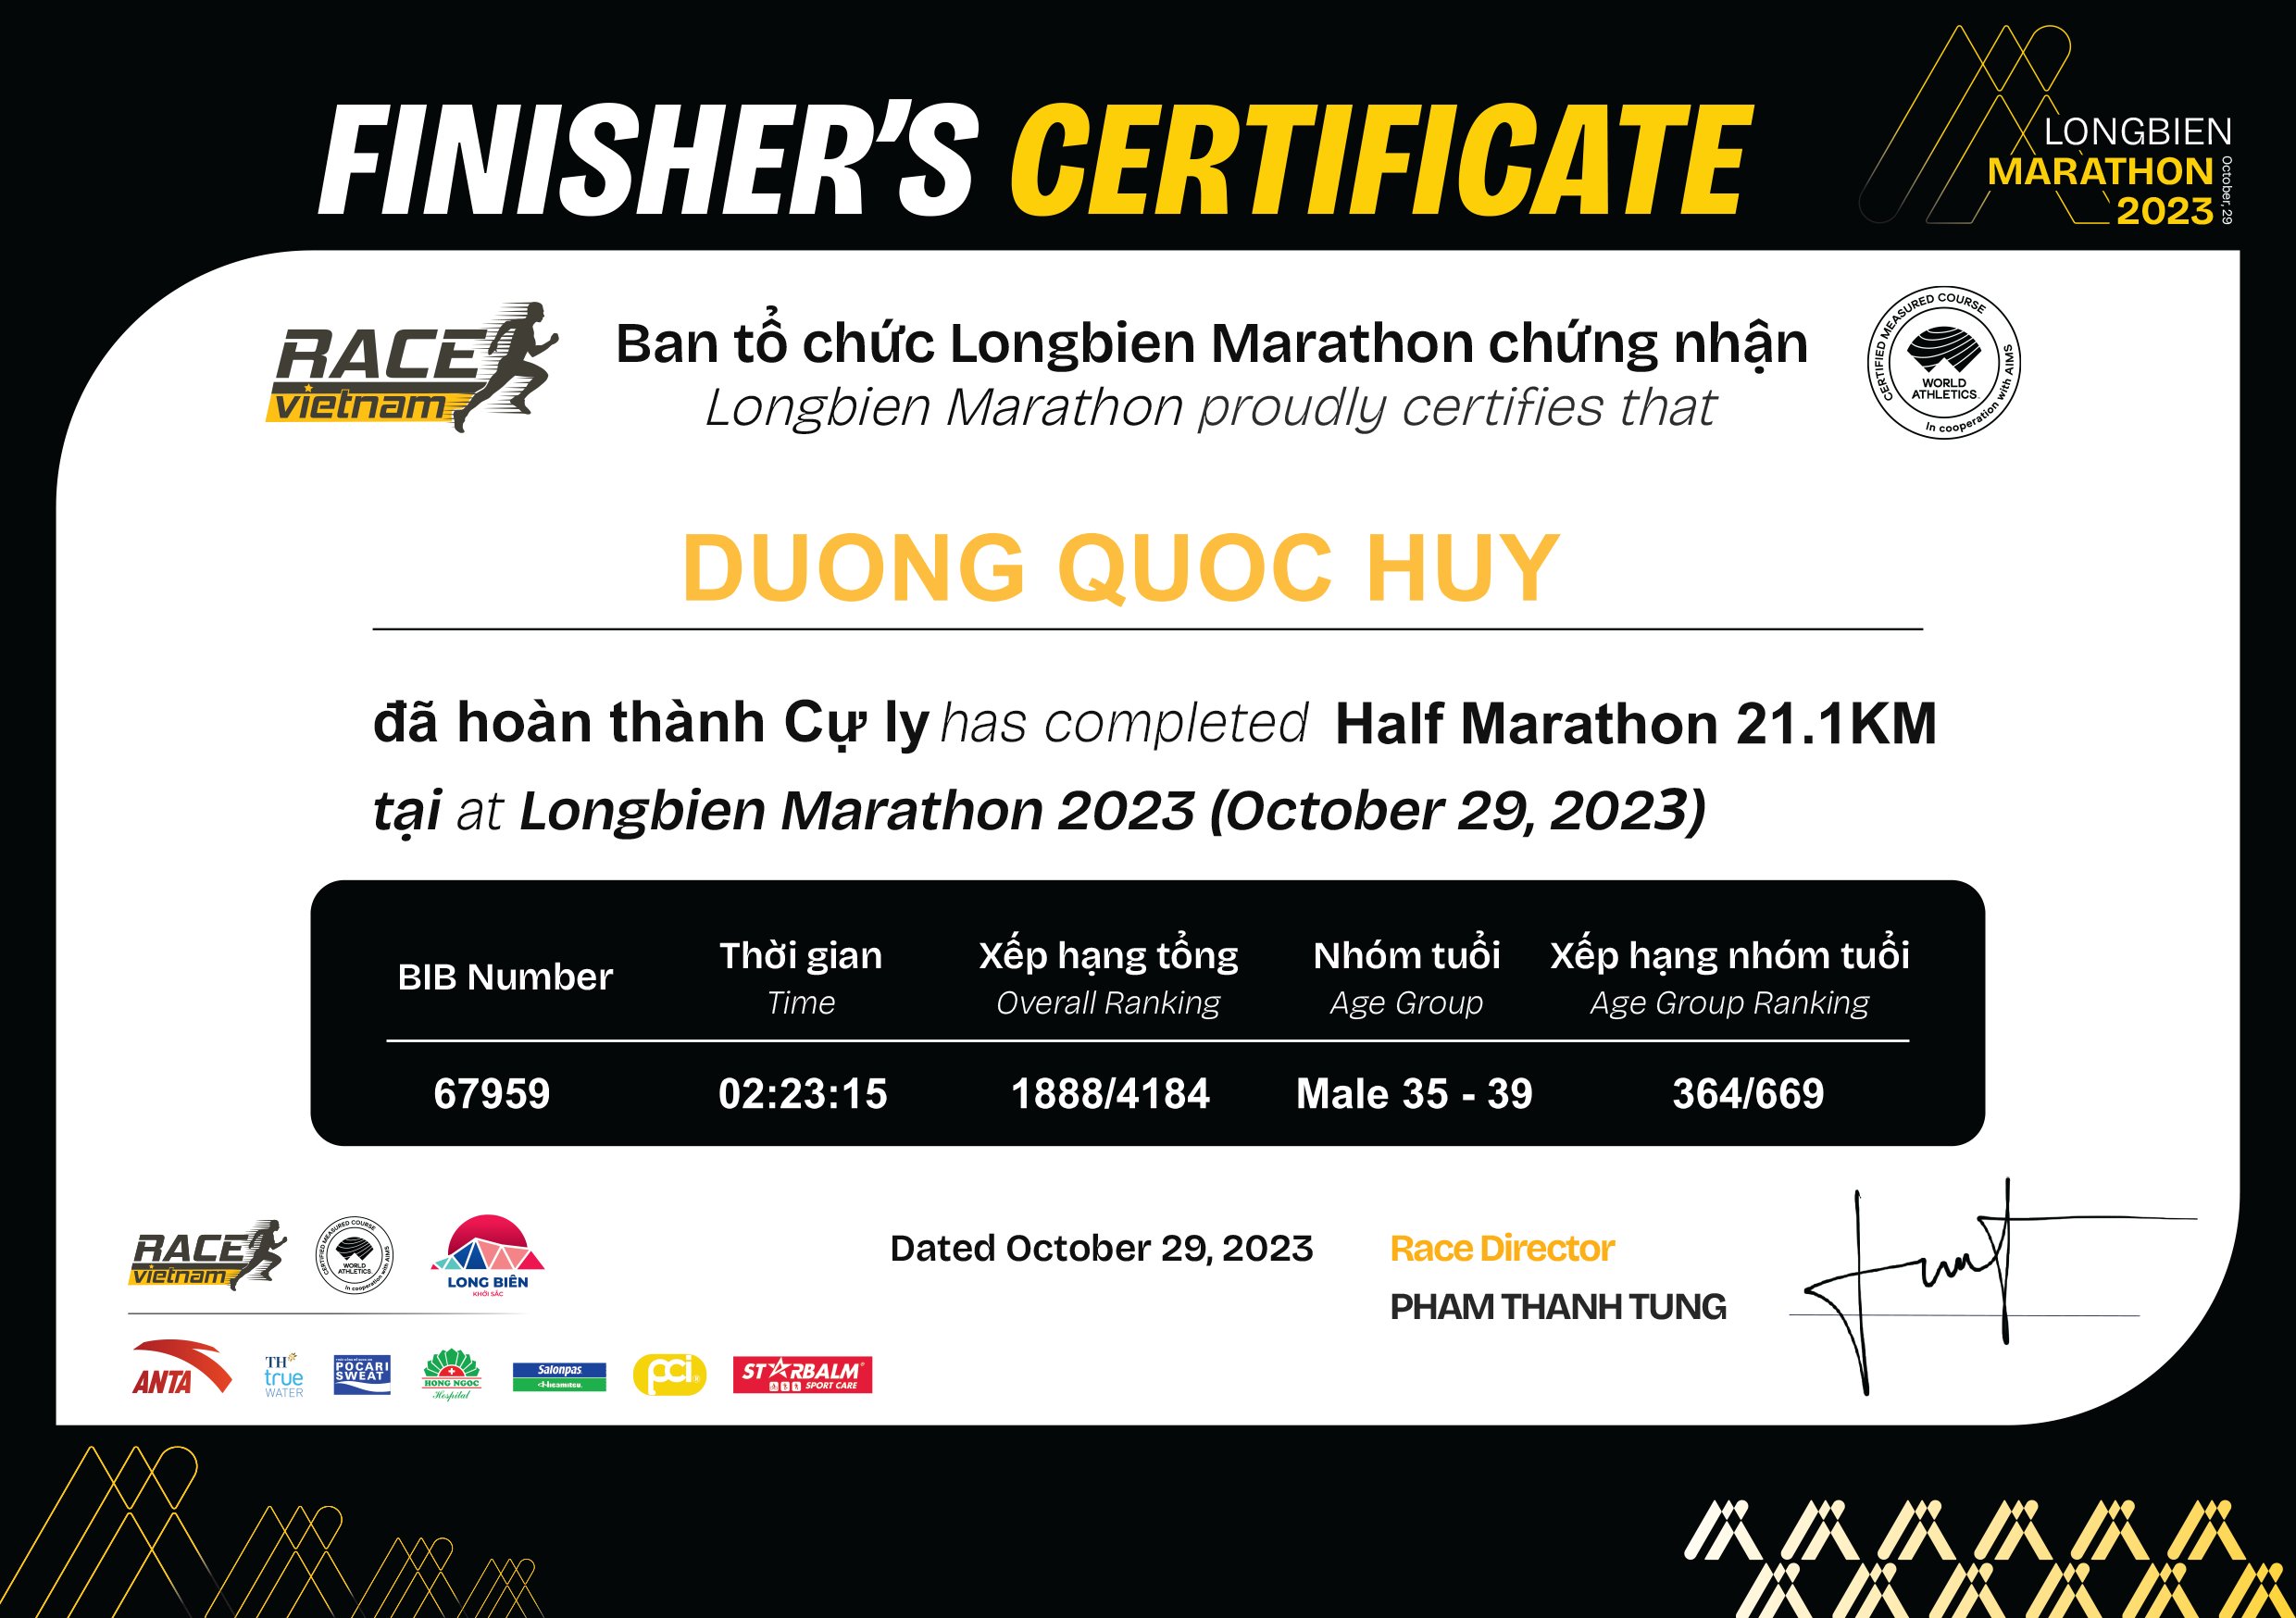 67959 - Duong Quoc Huy